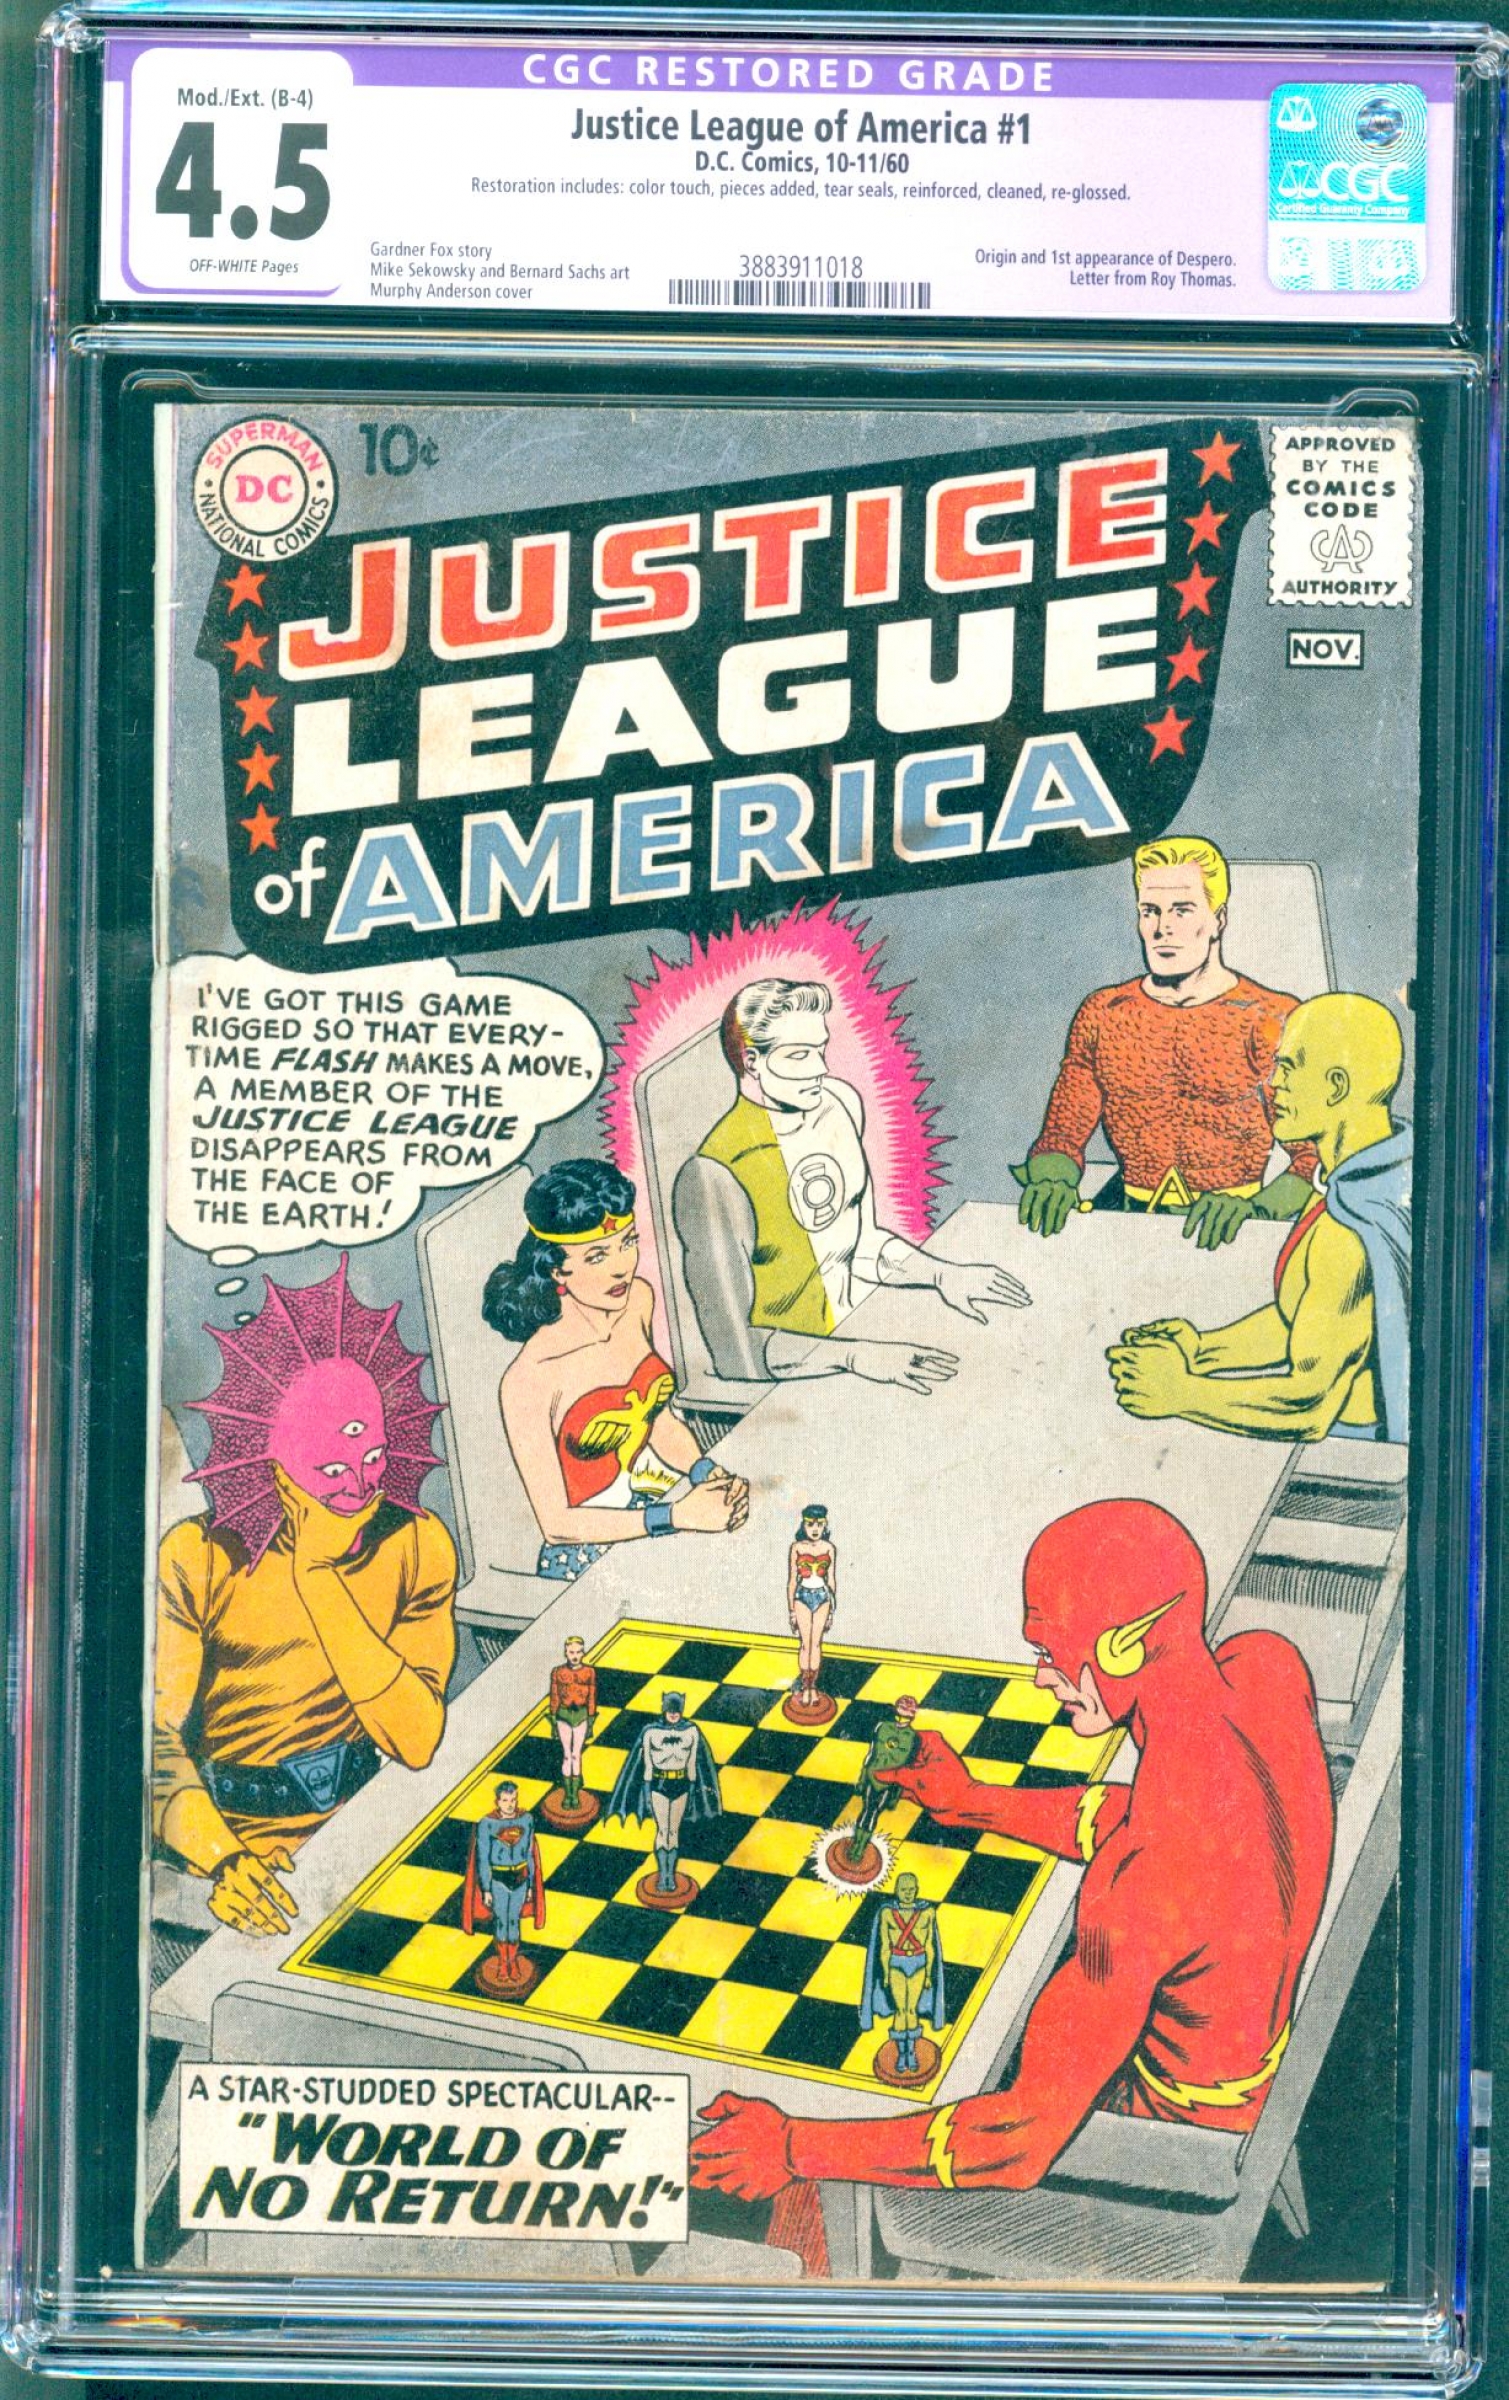 Justice League of America #1 CGC 4.5 ow